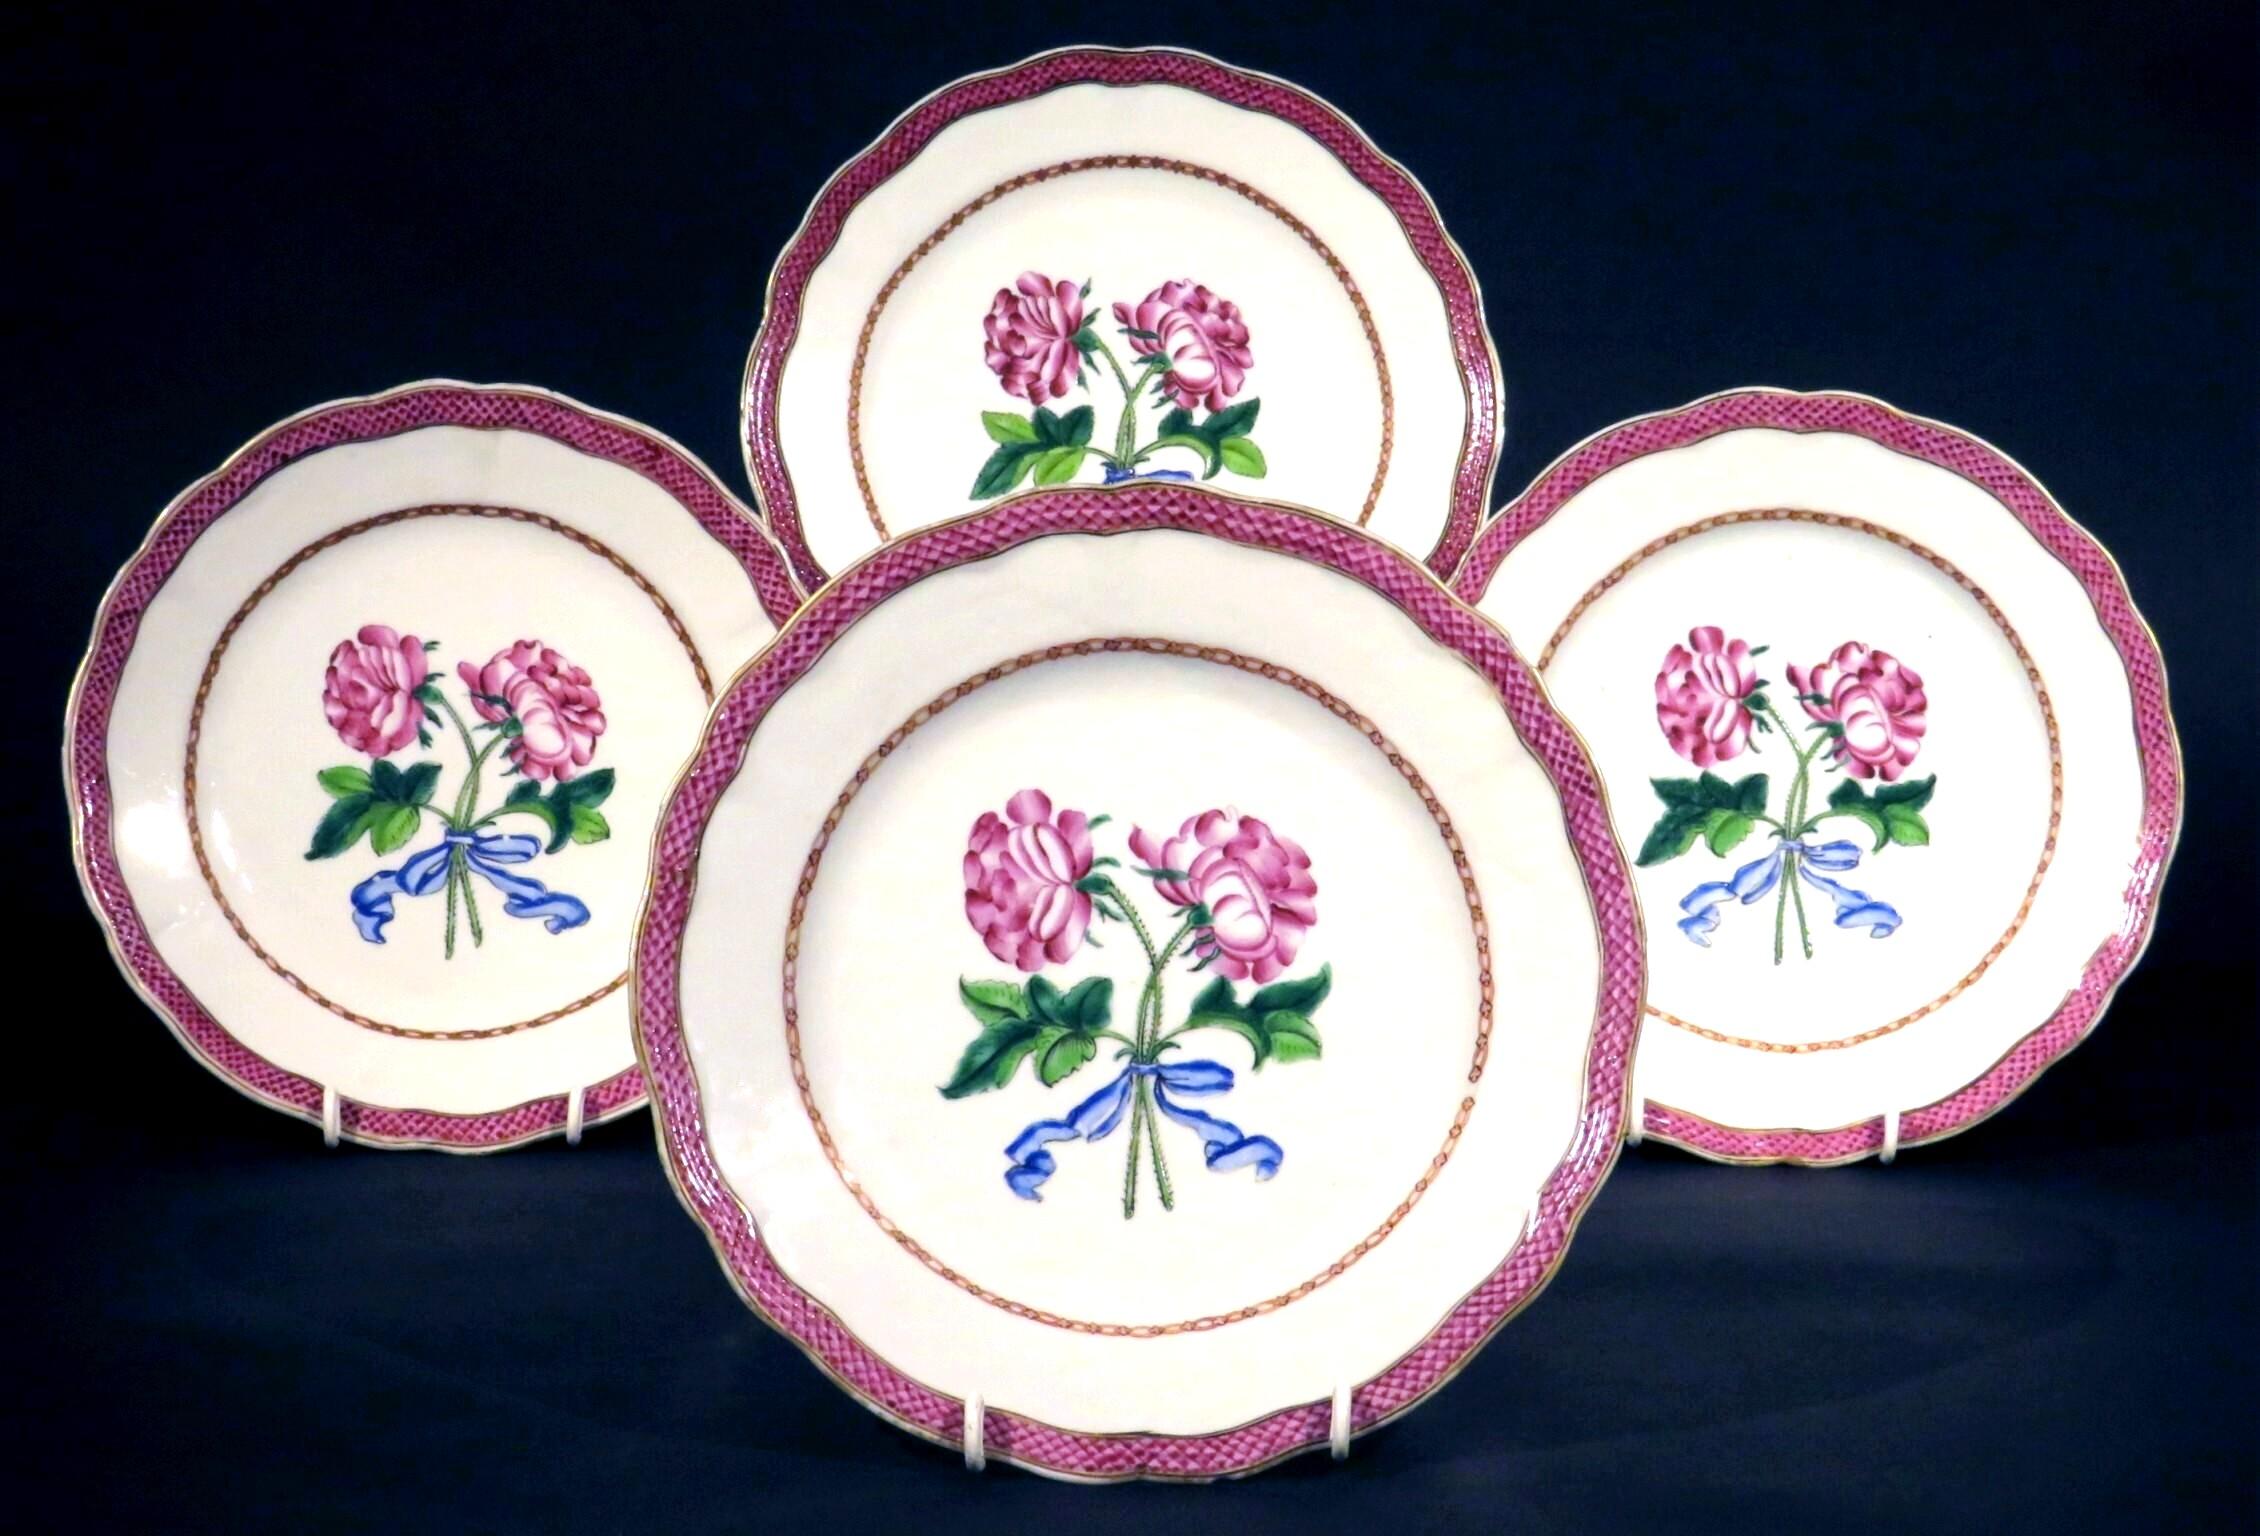 A very attractive group of four 18th century Chinese export porcelain botanical plates apparently made for the French market, circa 1775.
Each plate having a scalloped rim banded with enameled diaper motifs, the shallow central field decorated with